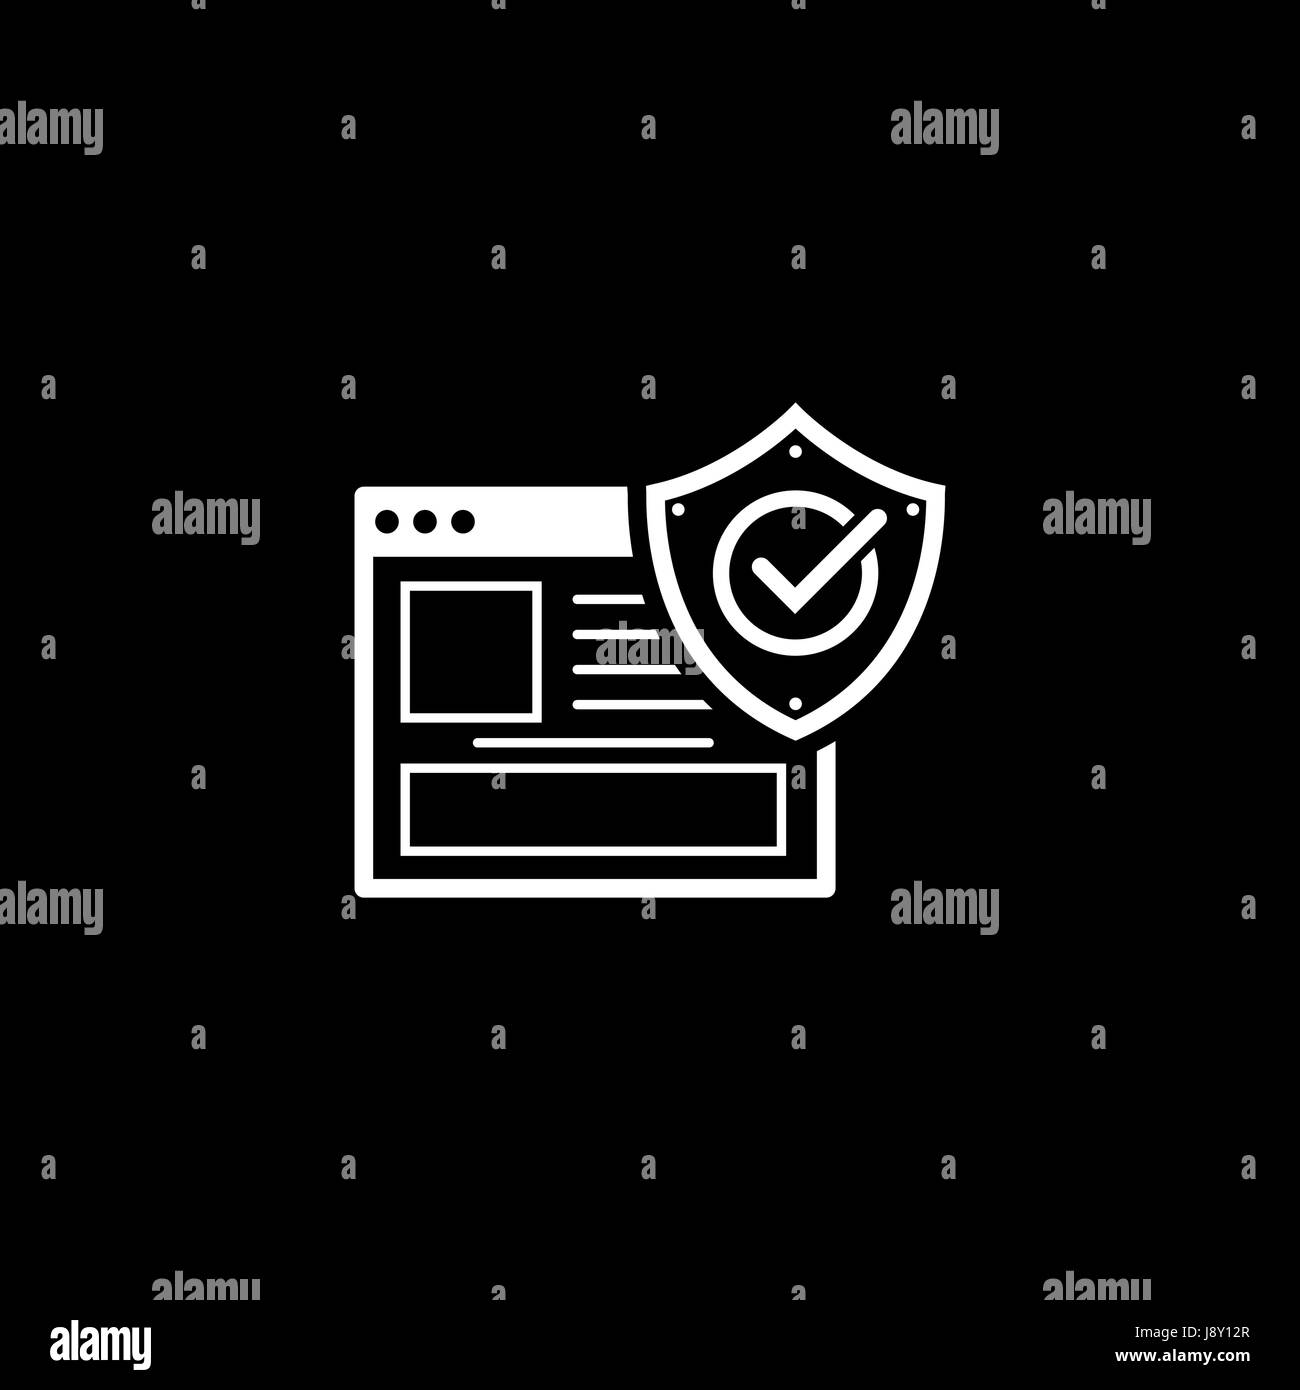 Online Protection Icon. Flat Design. Stock Vector